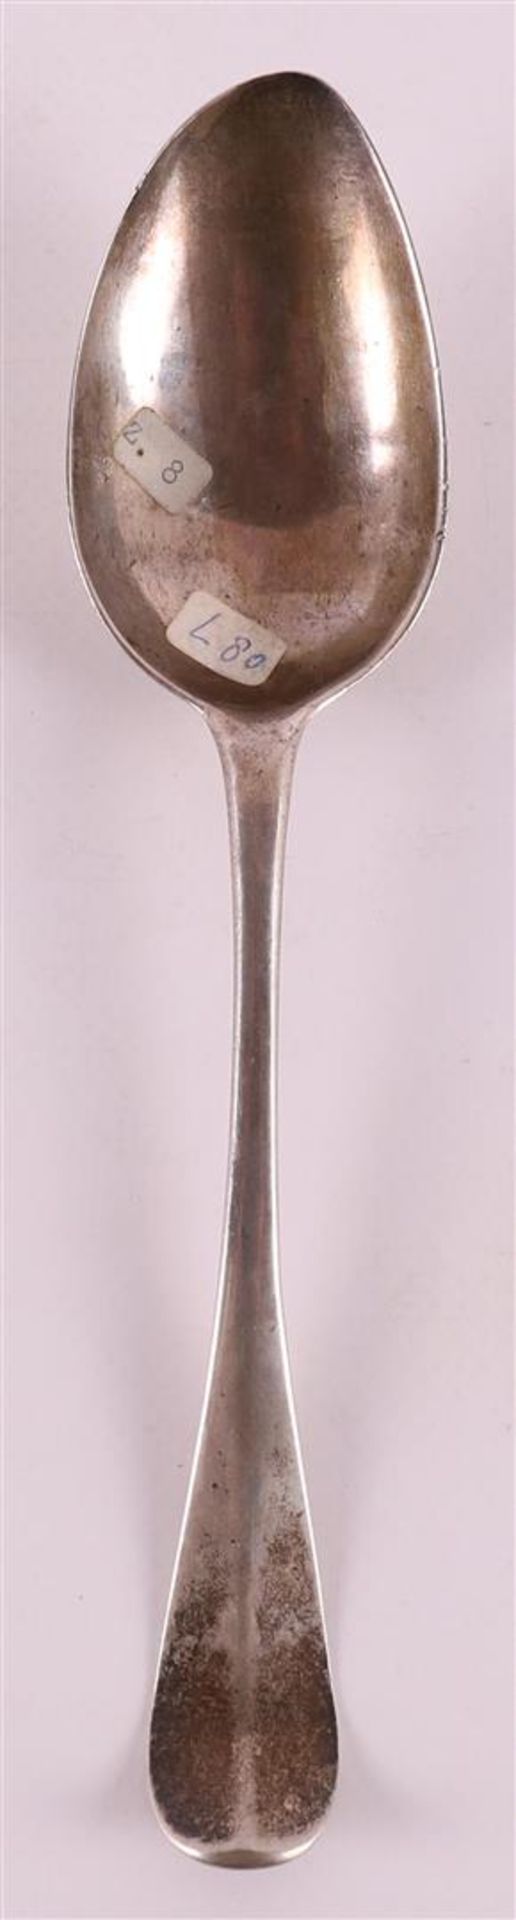 A silver memorial spoon with text, Groningen, year letter 1797/98. - Image 3 of 4